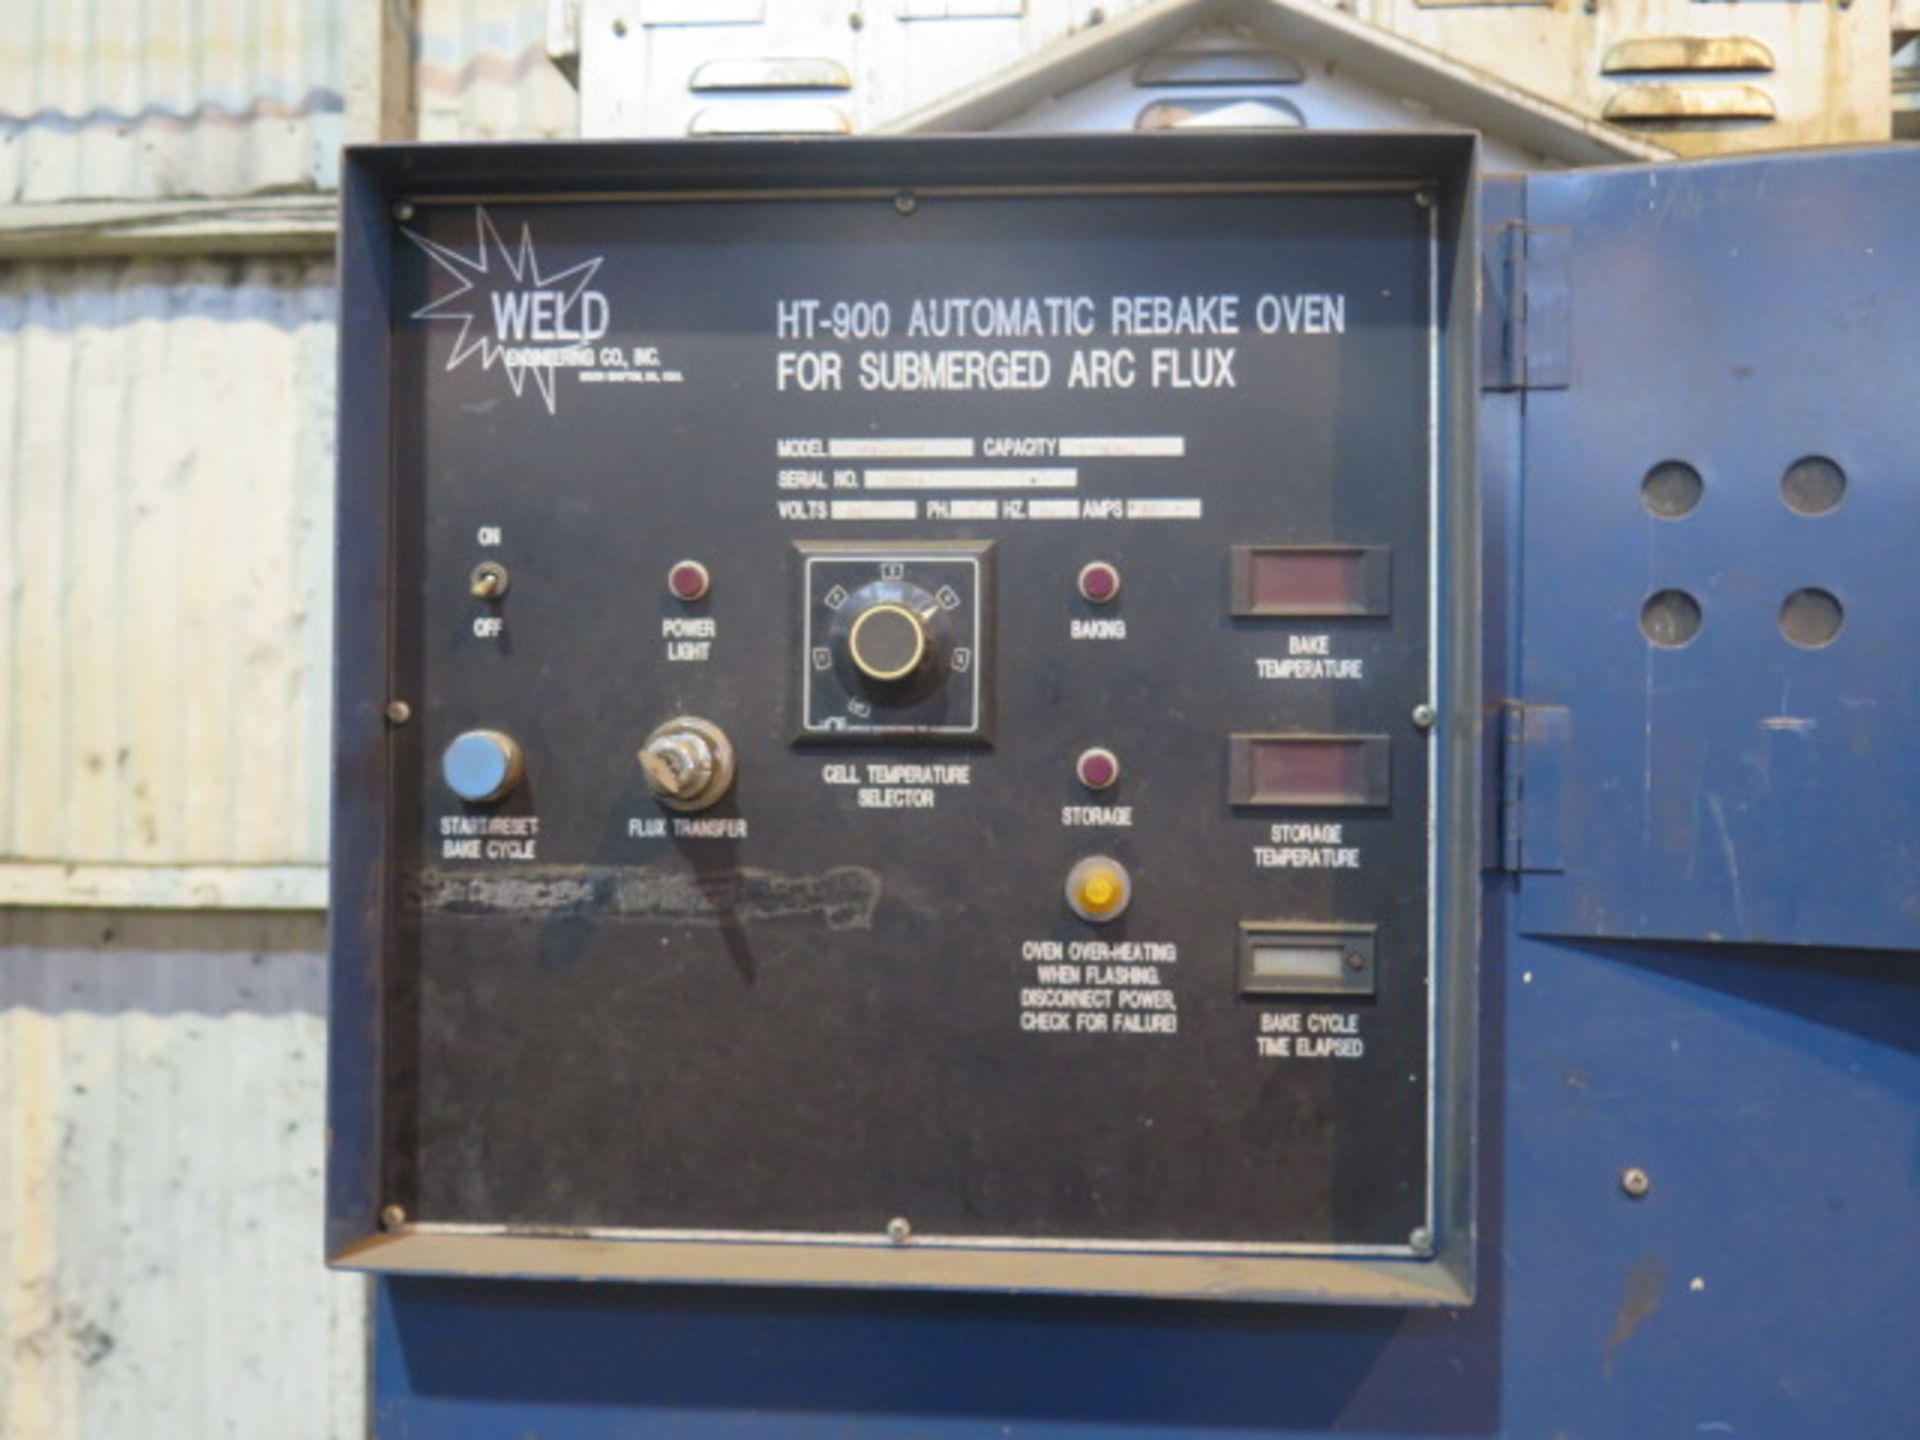 Weld Engineering mdl. HT-900 900 Lb Cap Auto Rebake Oven for Submerged Arc Flux - Image 2 of 3